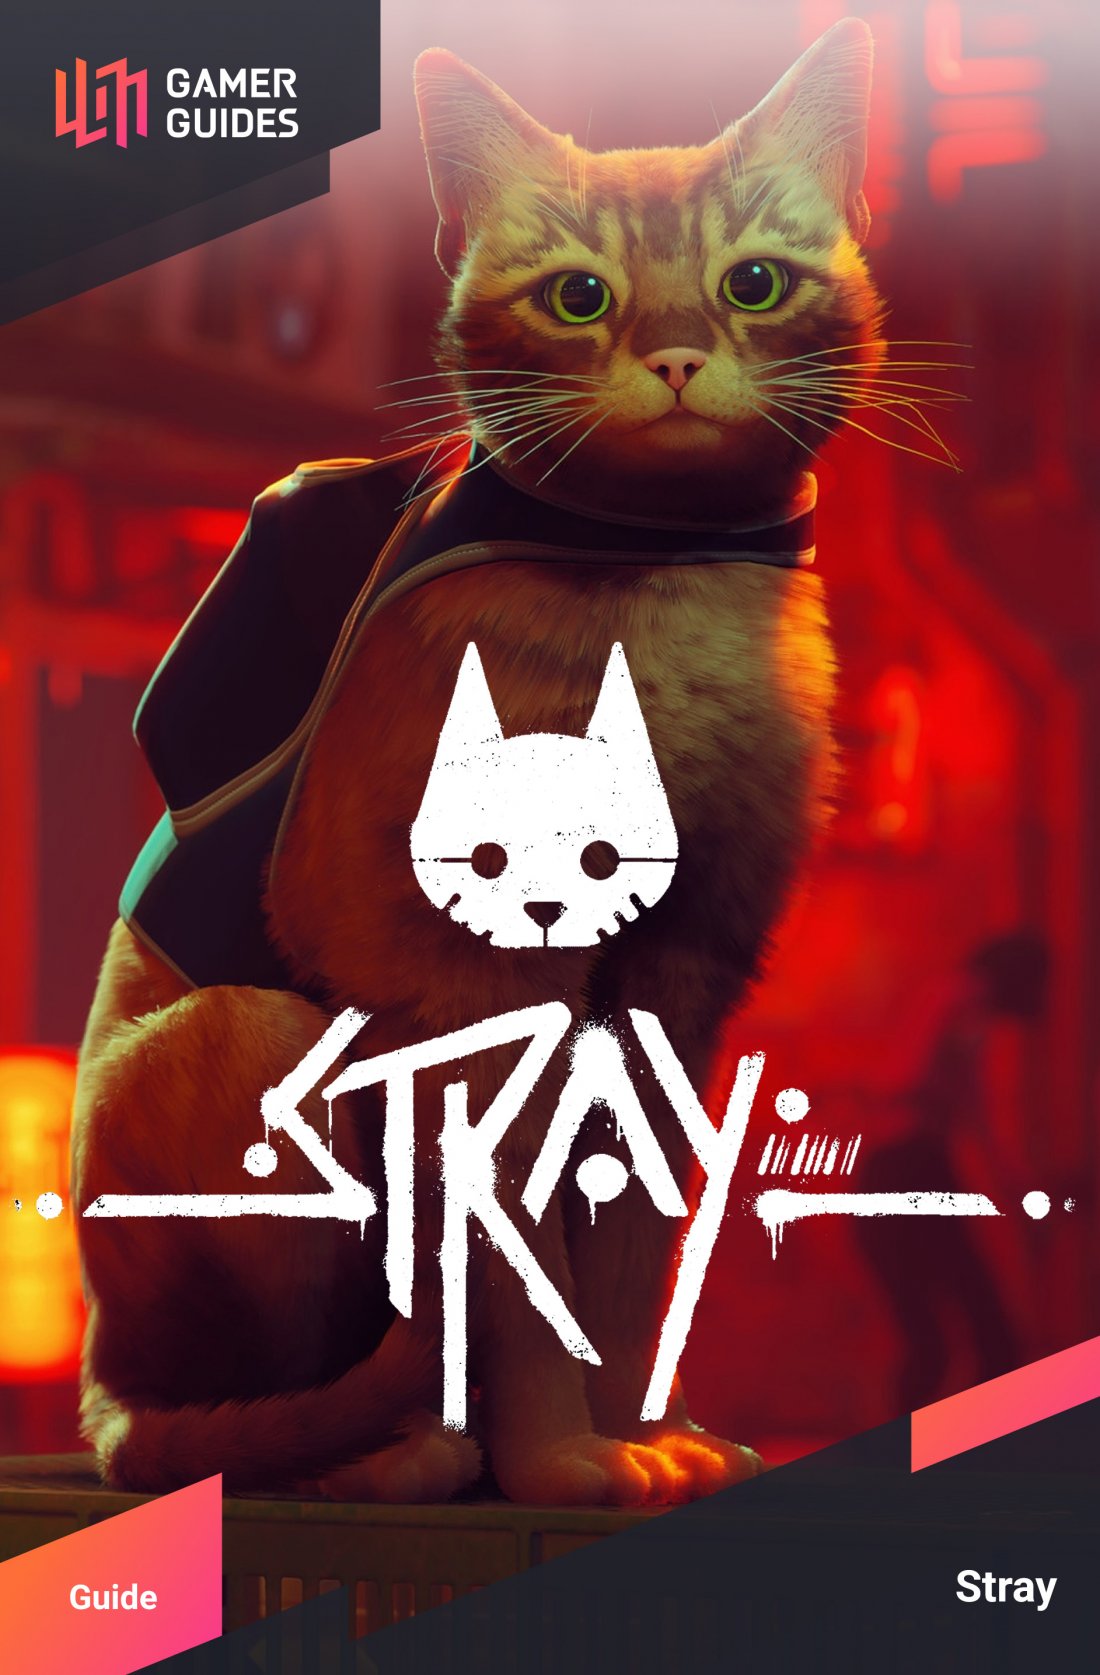 Stray Launches on the 19th of July, 2022.